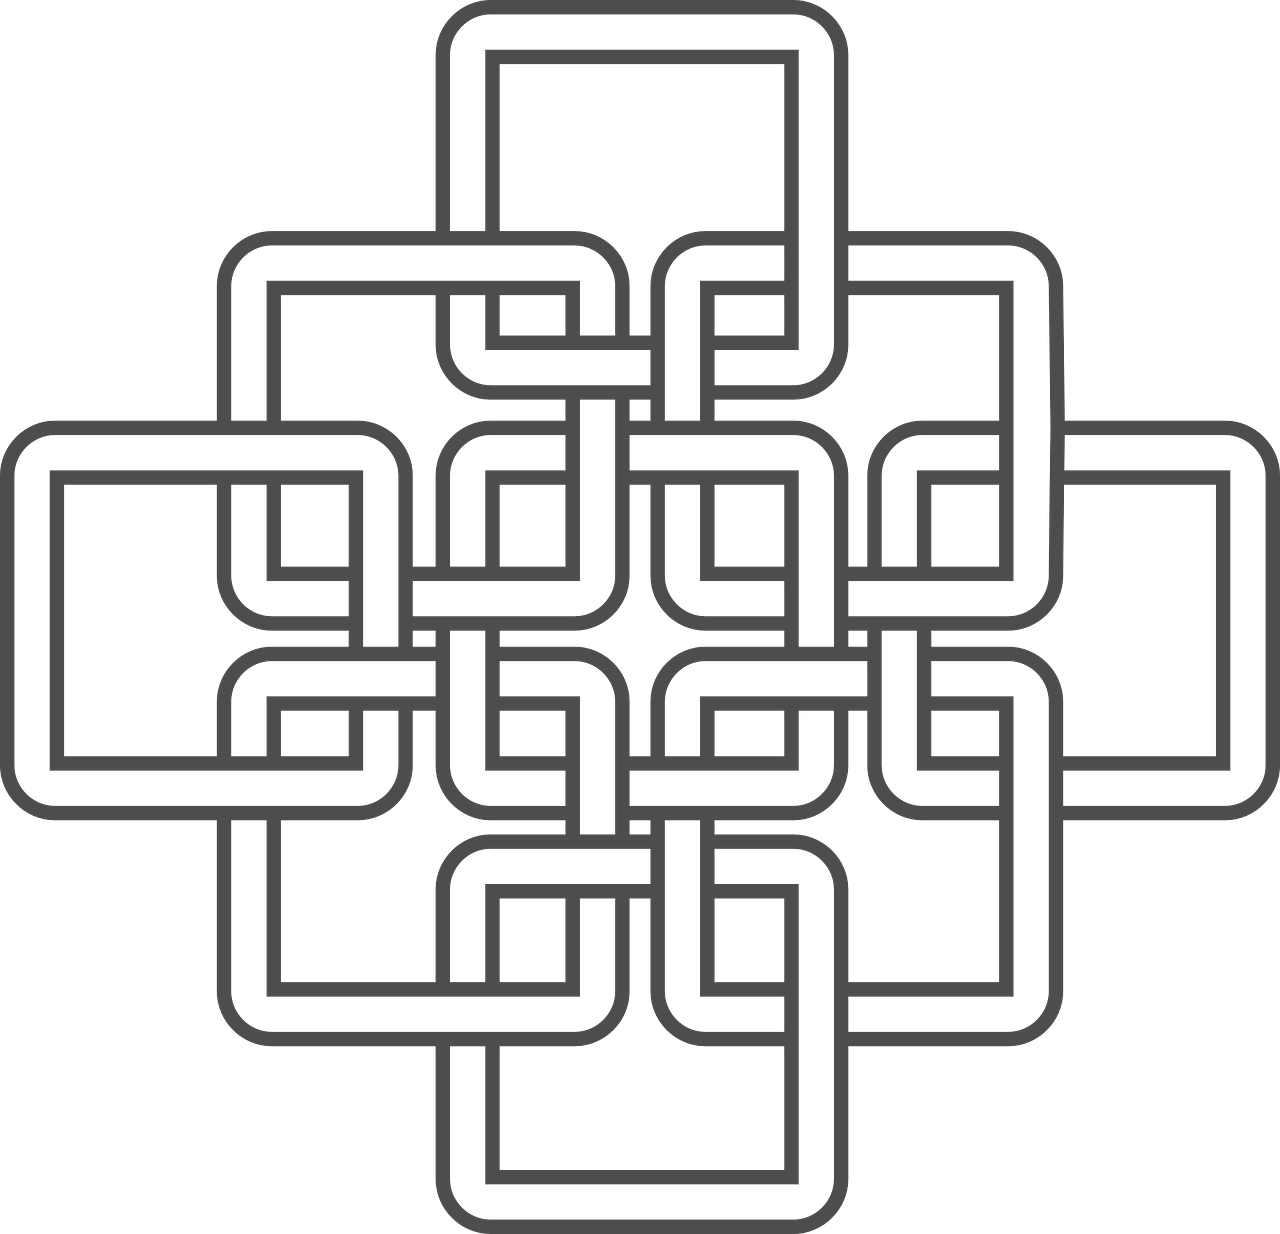 celtic,knots,inspired,connected,symbol,irish,ornamental,symmetry,free vector graphics,free pictures, free photos, free images, royalty free, free illustrations, public domain